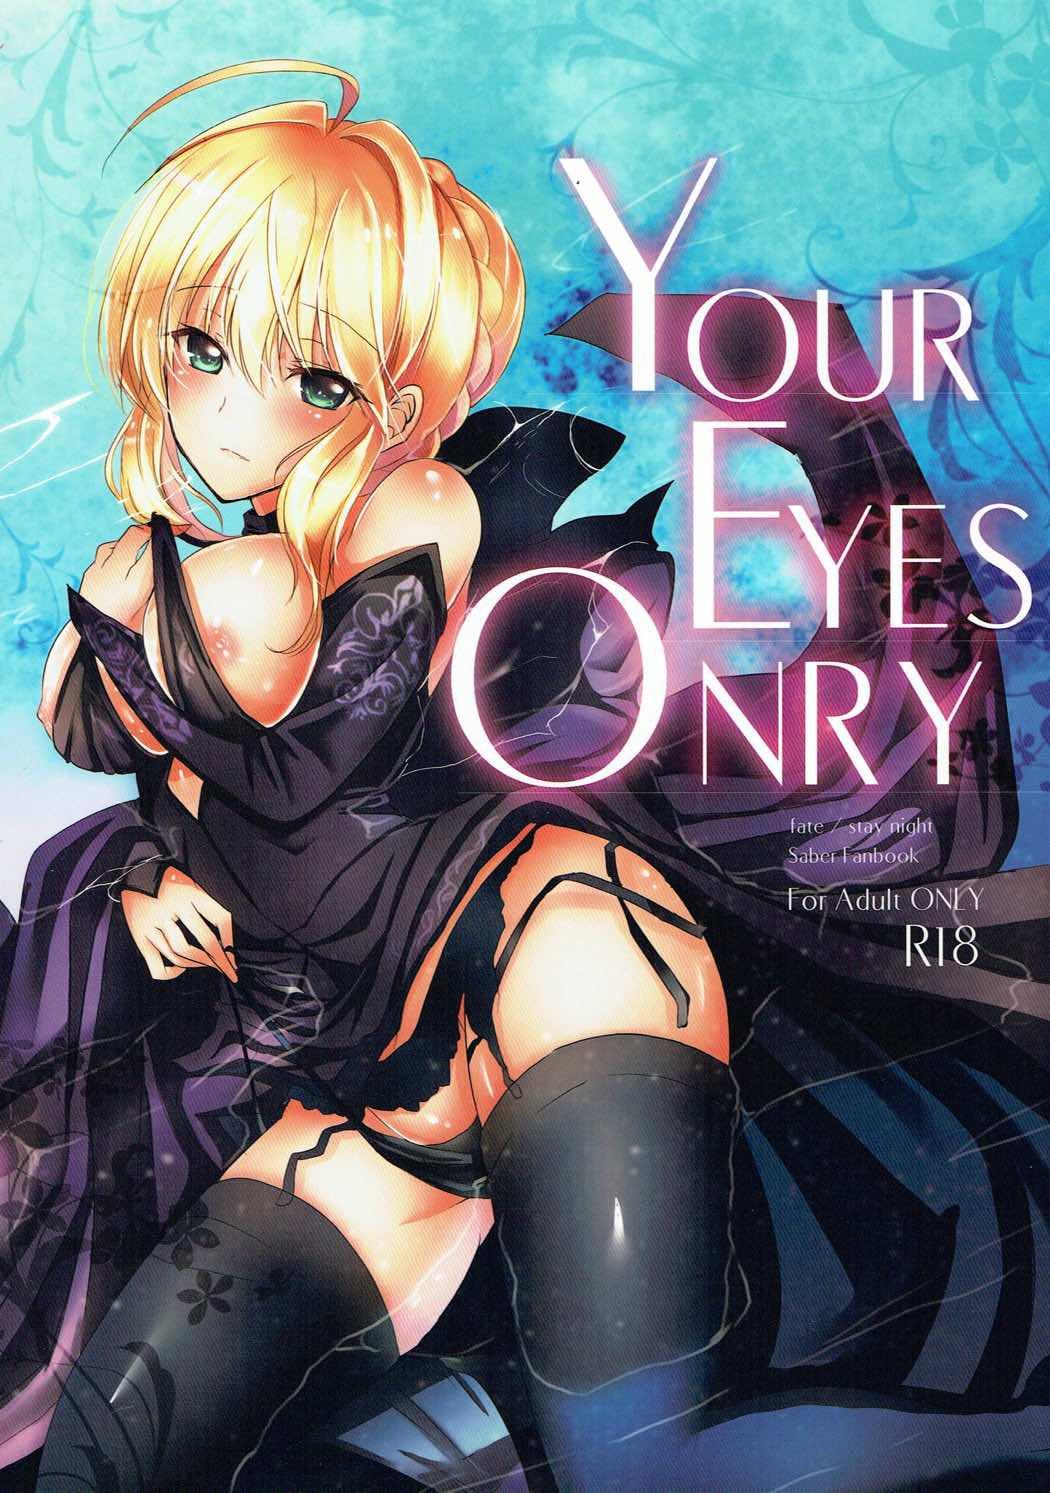 Real Orgasm YOUR EYES ONRY - Fate stay night Sex Party - Page 1